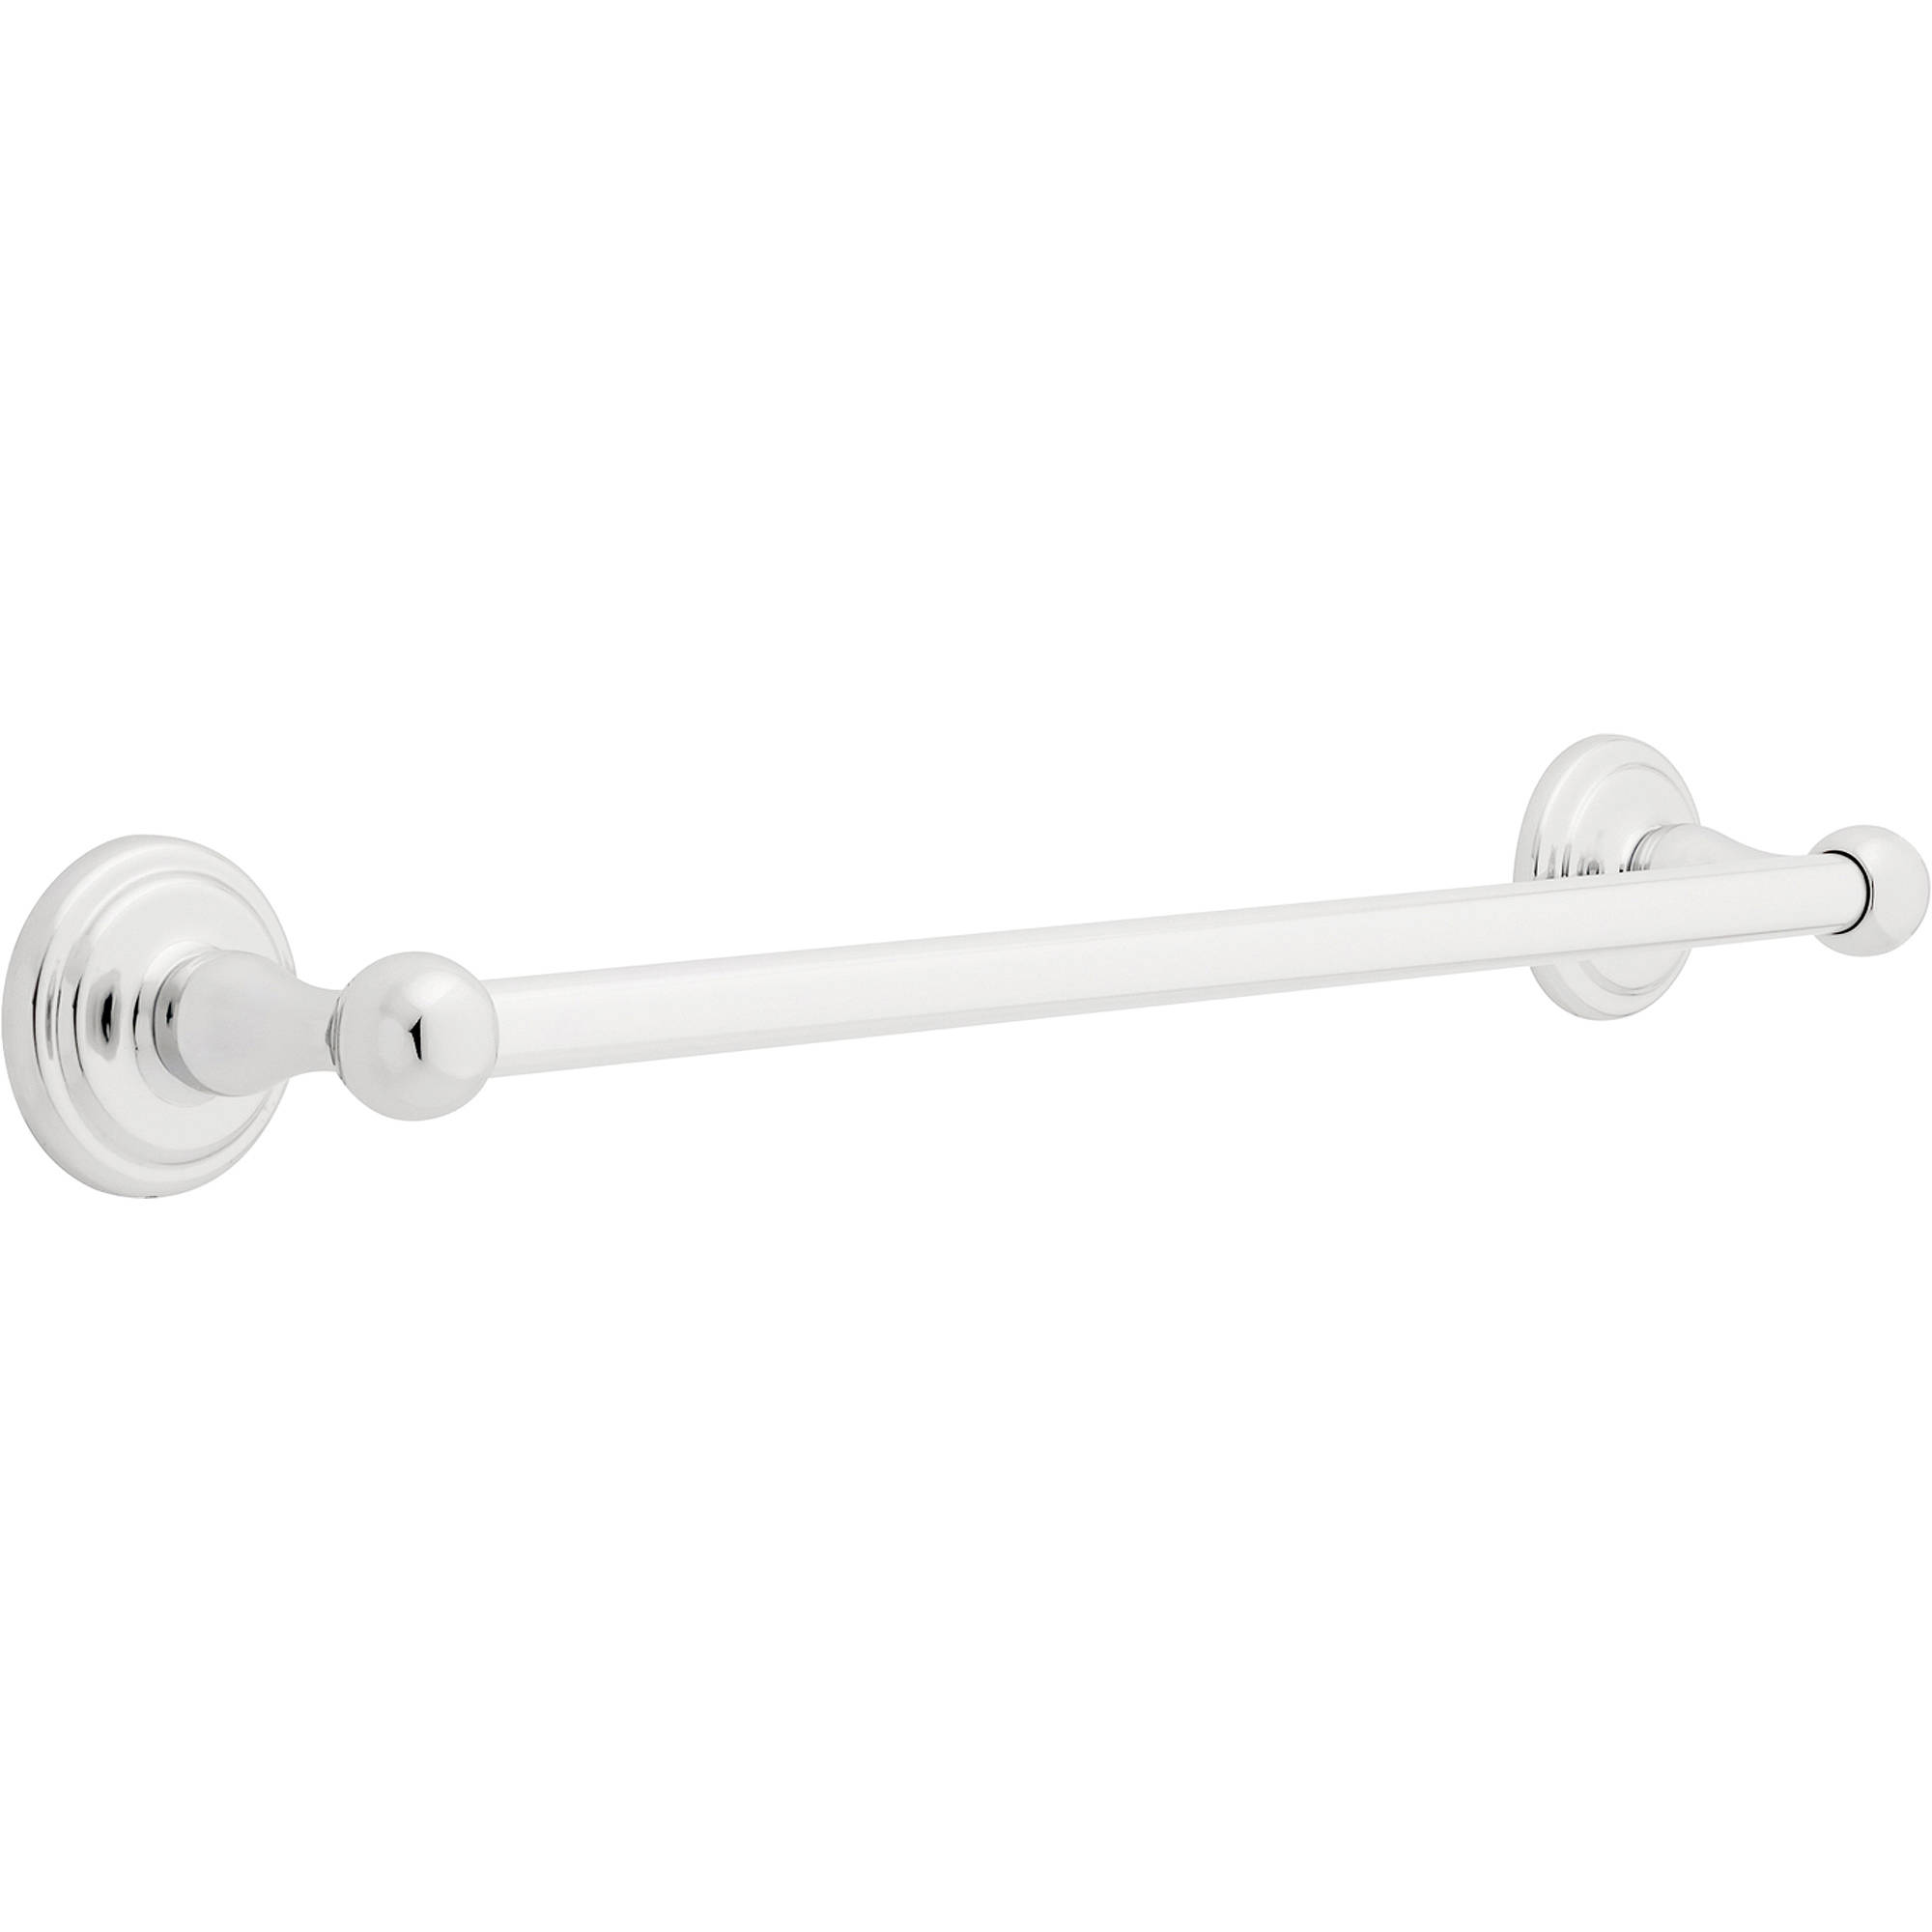 Franklin Brass Jamestown Towel Bar, Available in Multiple Colors and Sizes - image 1 of 3